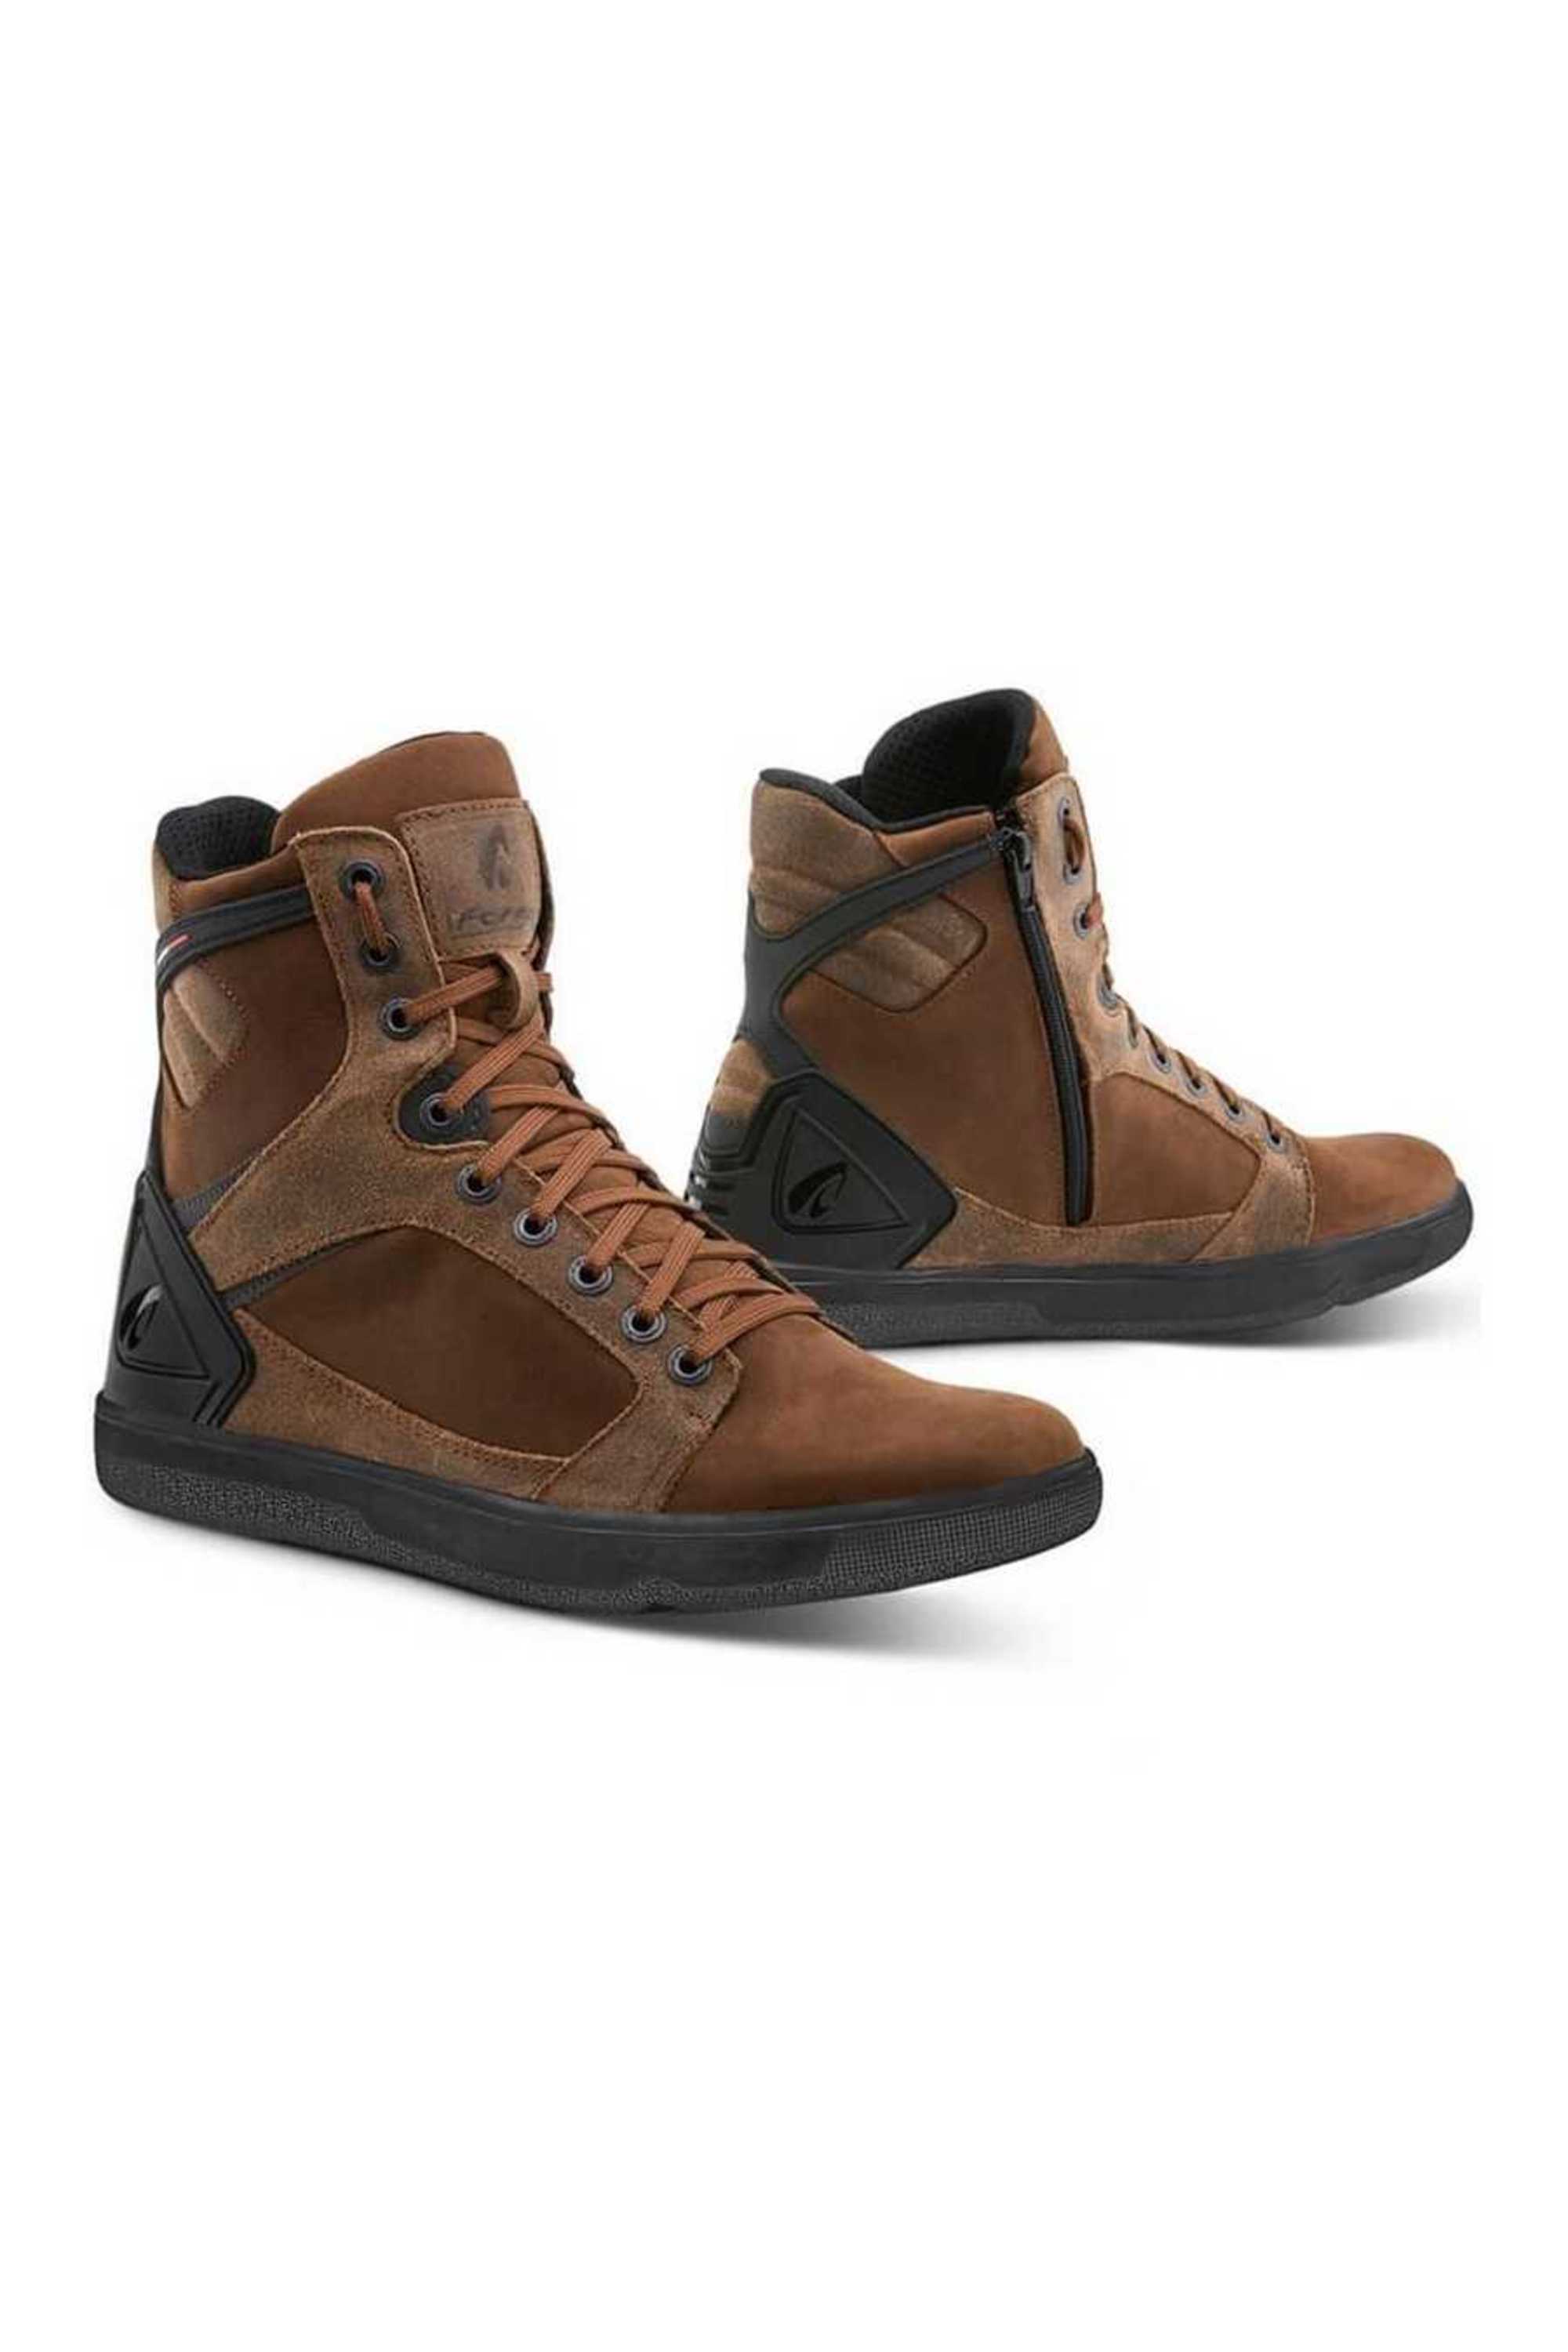 forma shoes boots adult hyper dry